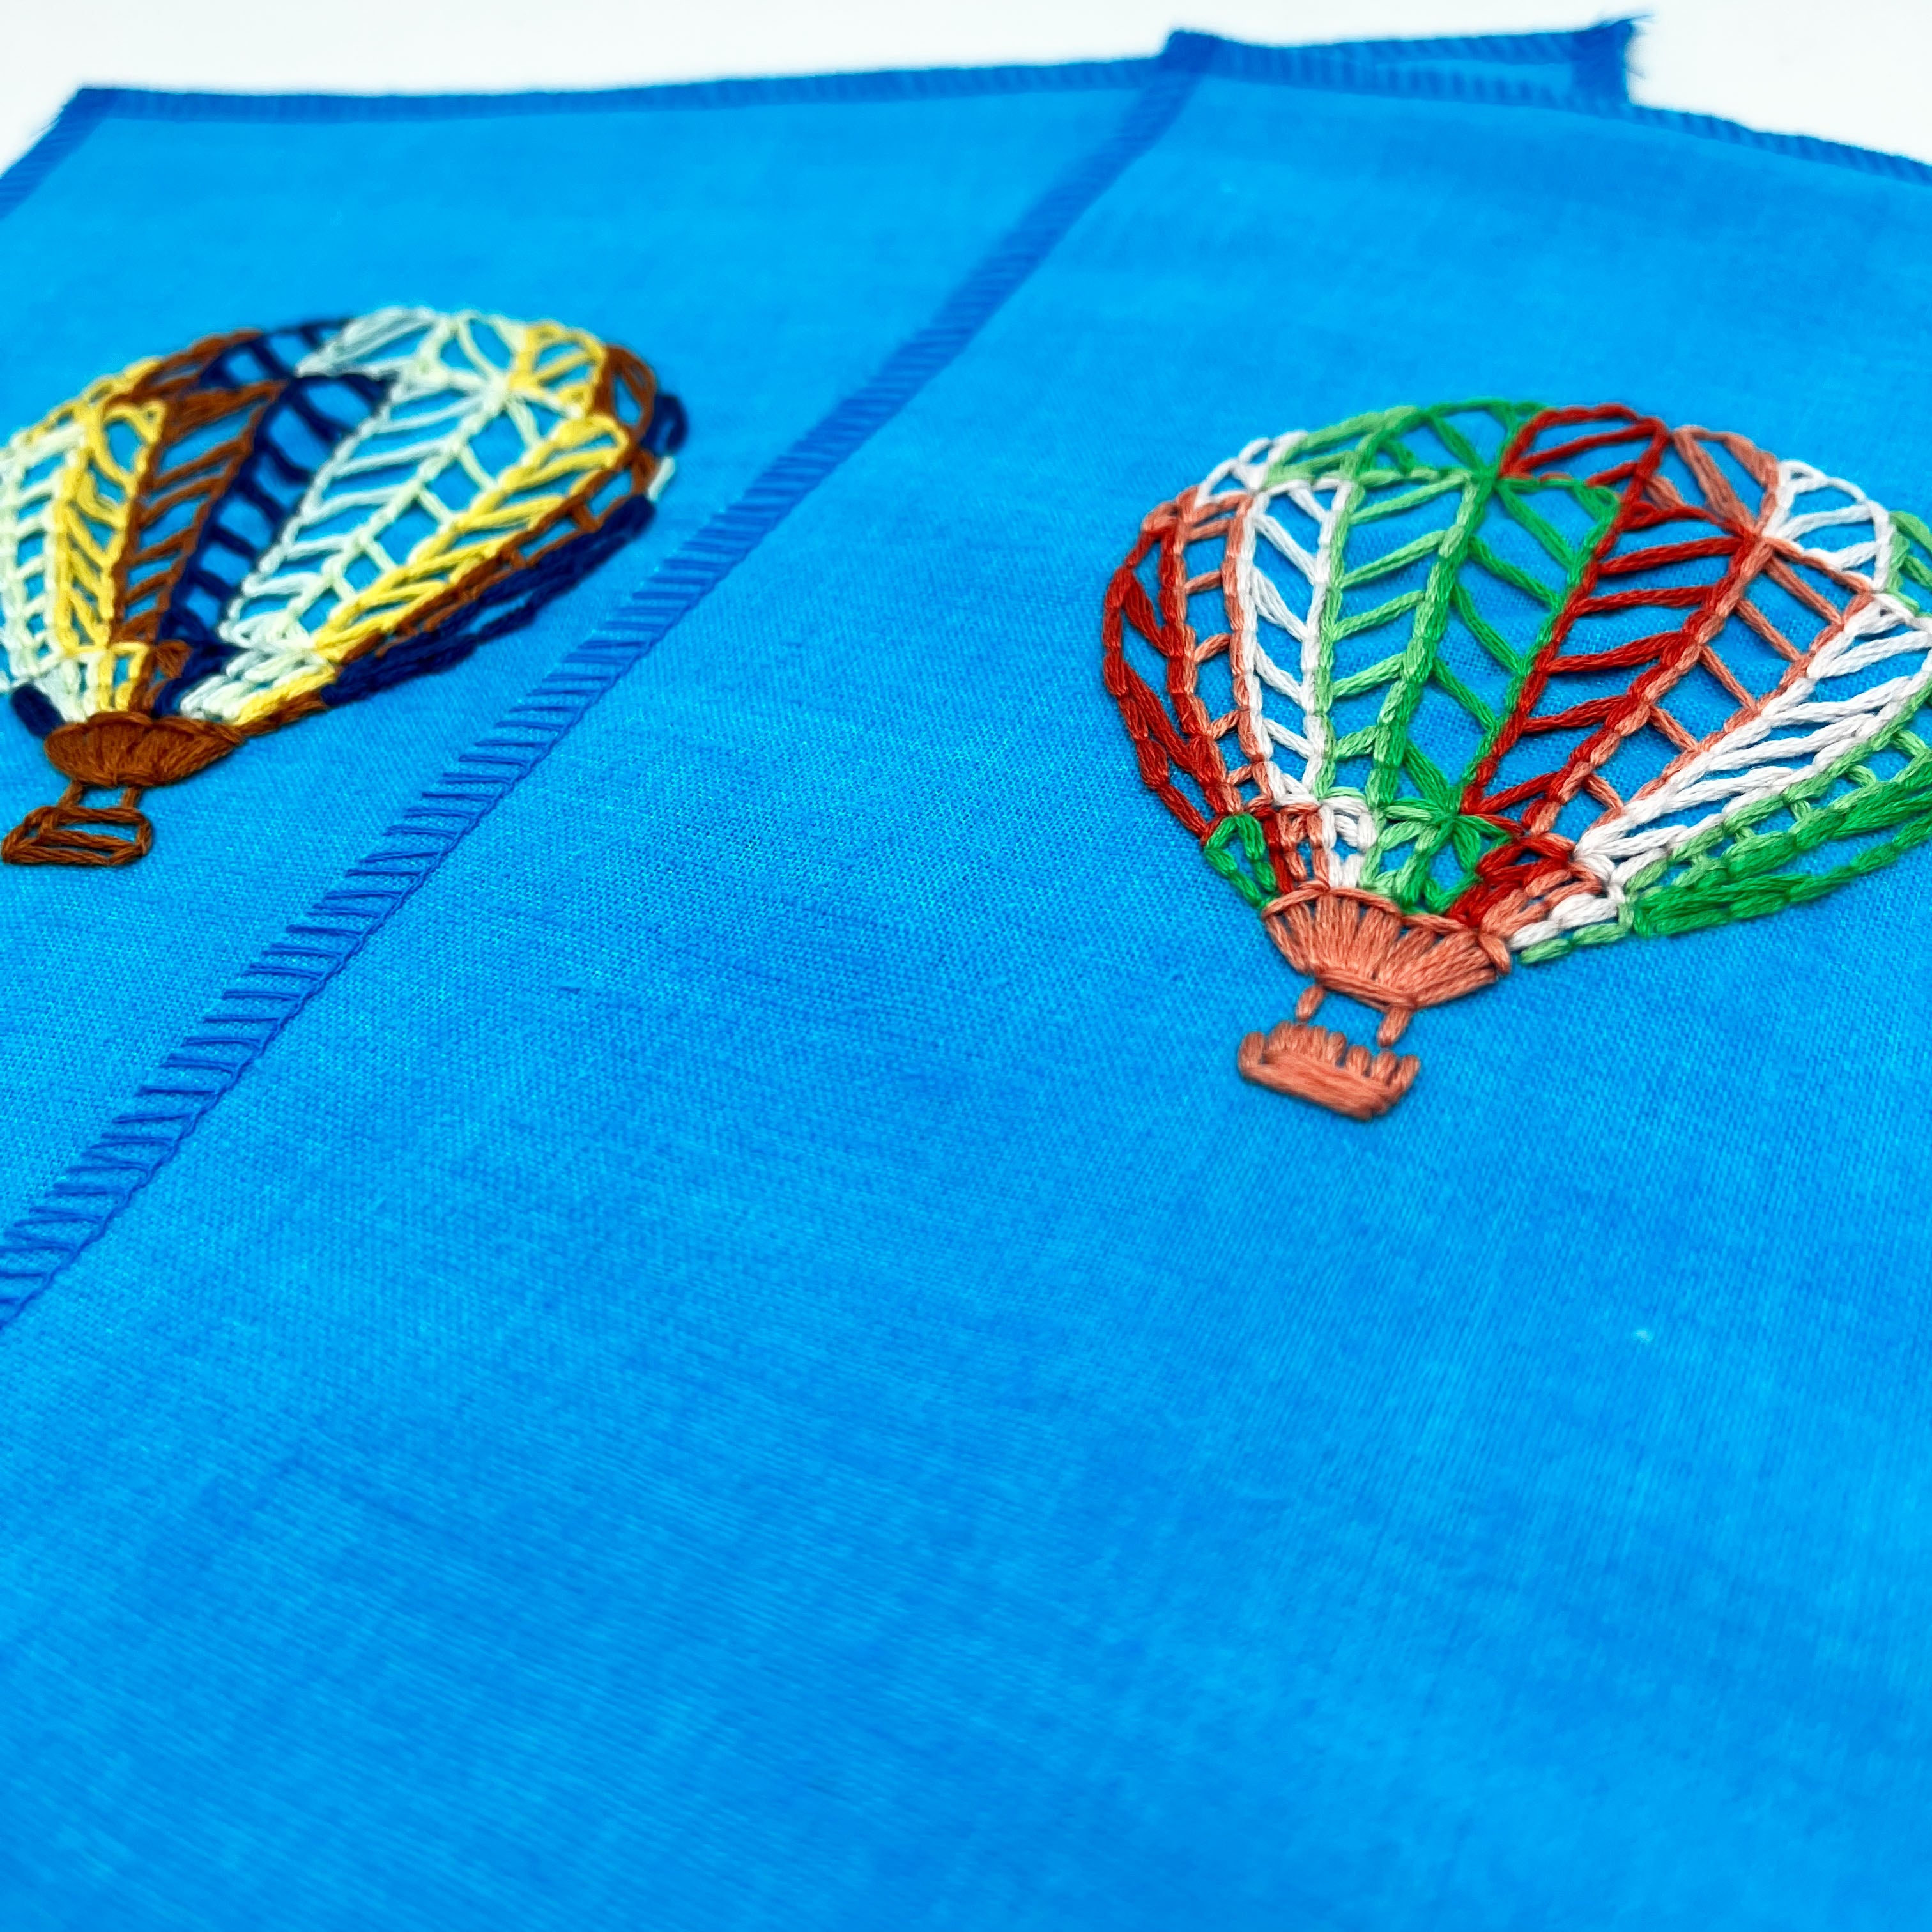 Wall Hanging- Hand Embroidered Hot Air Balloon on Bright Blue